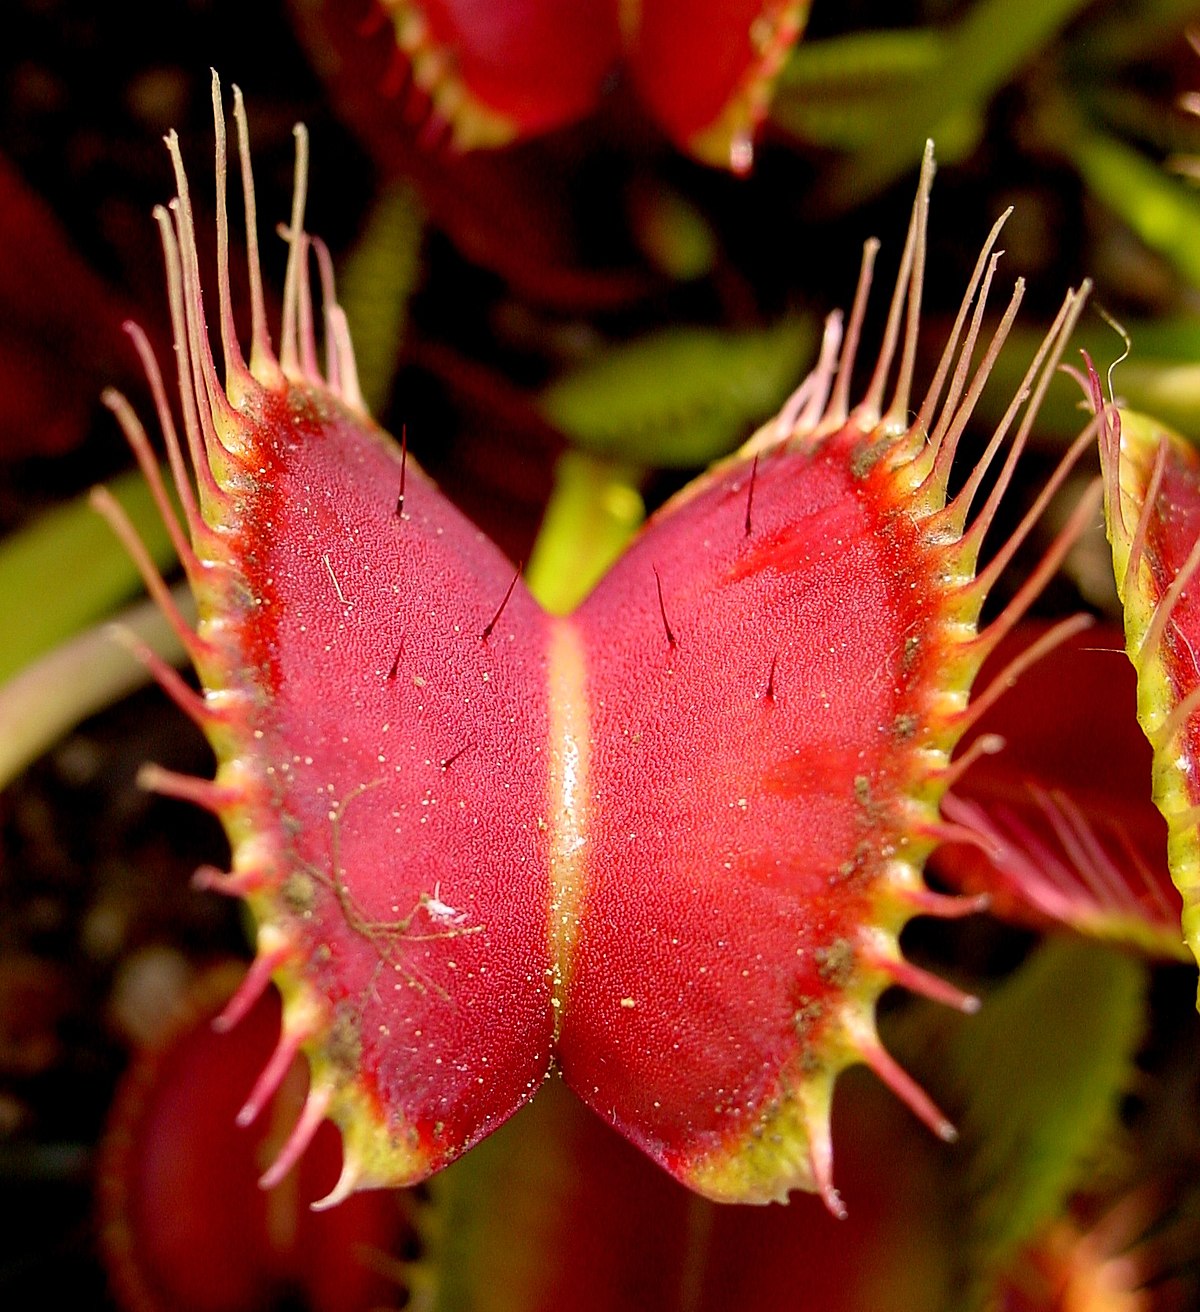 How To Grow Venus Fly Trap: A Complete Guide